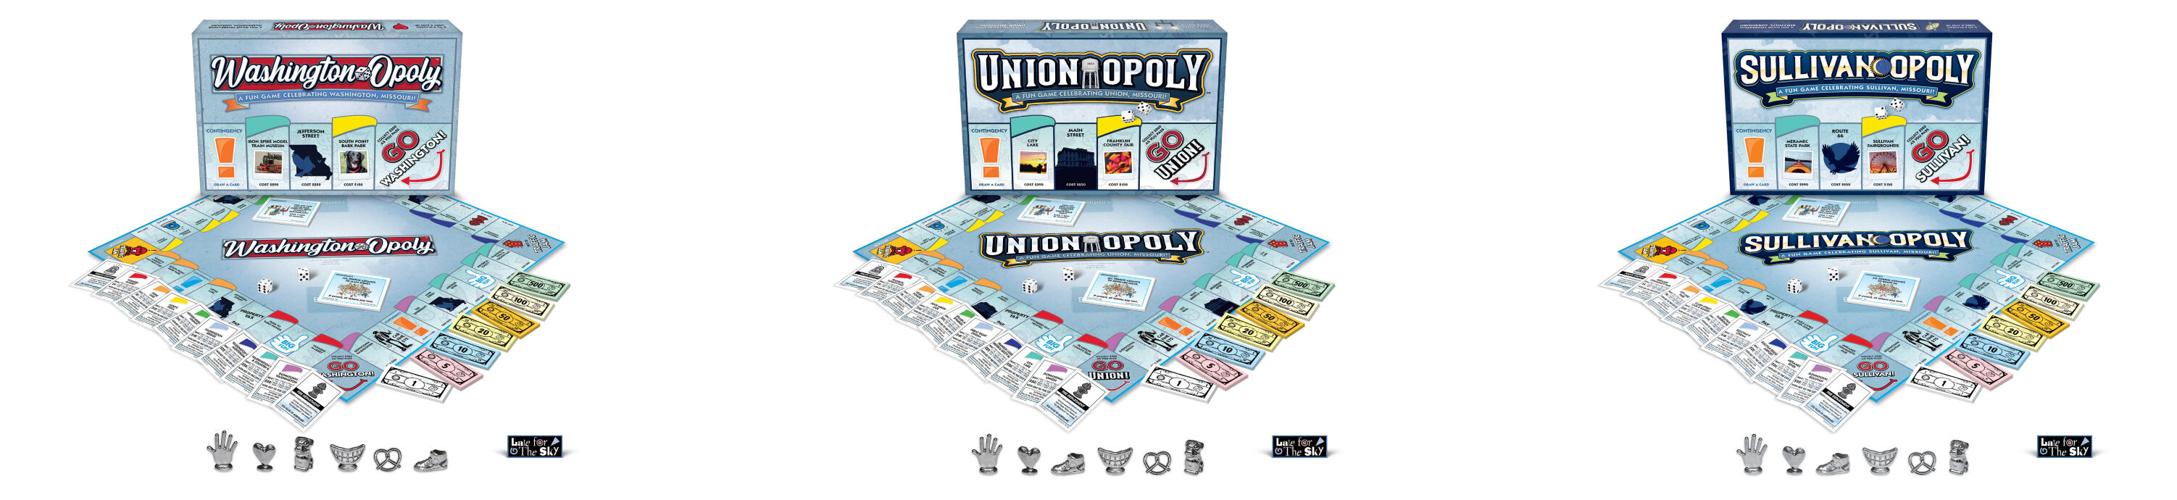 St. Louis Opoly Board Game, by Late for the Sky